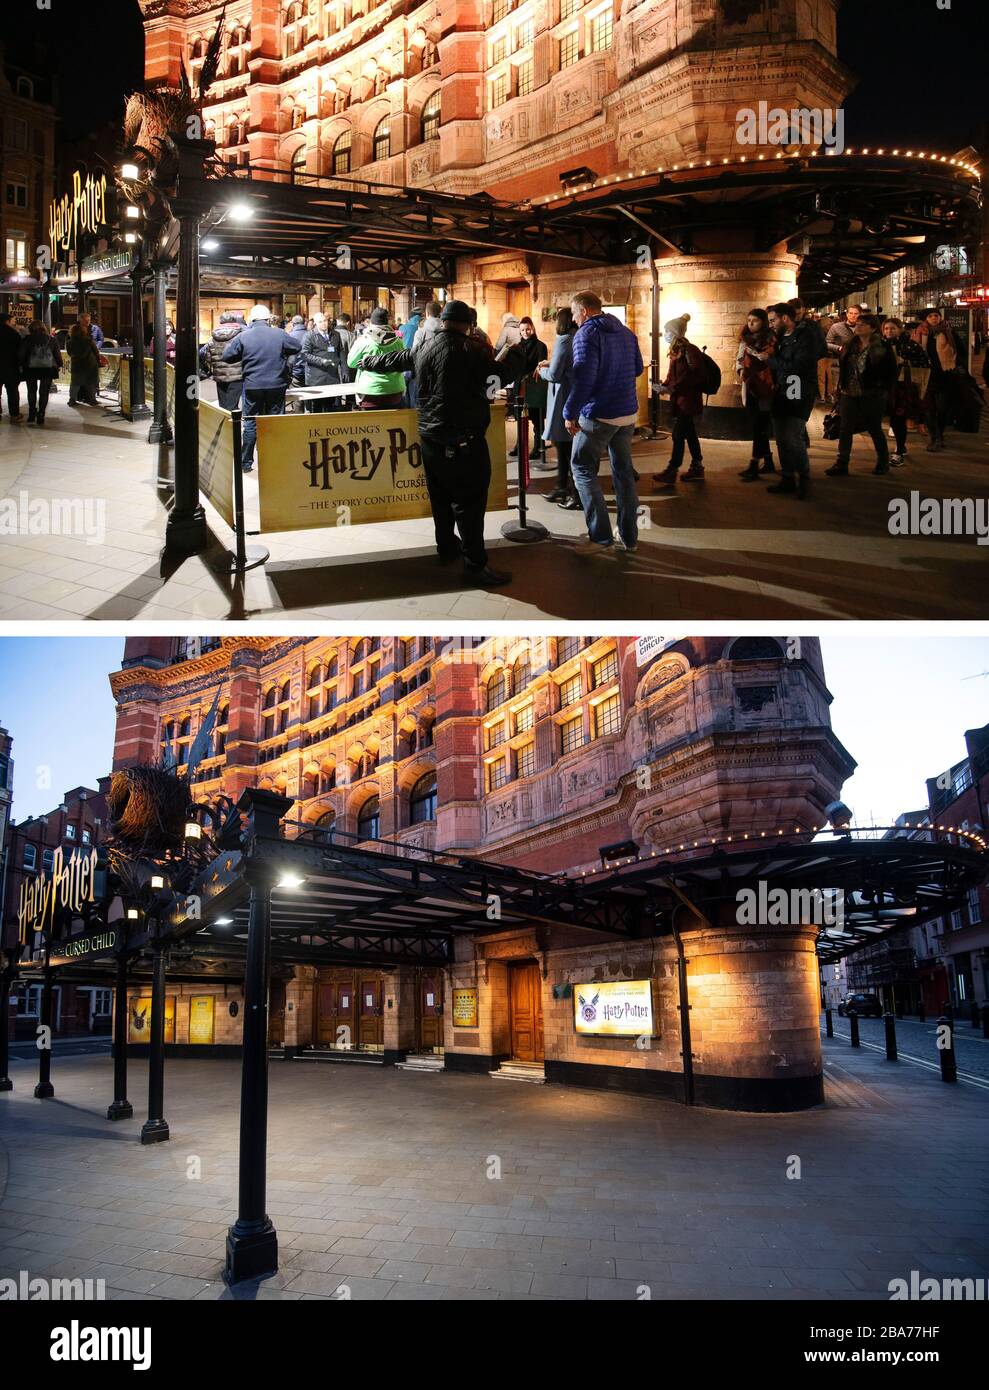 Composite photos of ticket holders for Harry Potter and the Cursed Child in line outside the Palace Theatre, London on 12/03/20 (top), and the theatre on Tuesday 24/03/20 (bottom), the day after Prime Minister Boris Johnson put the UK in lockdown to help curb the spread of the coronavirus. Stock Photo